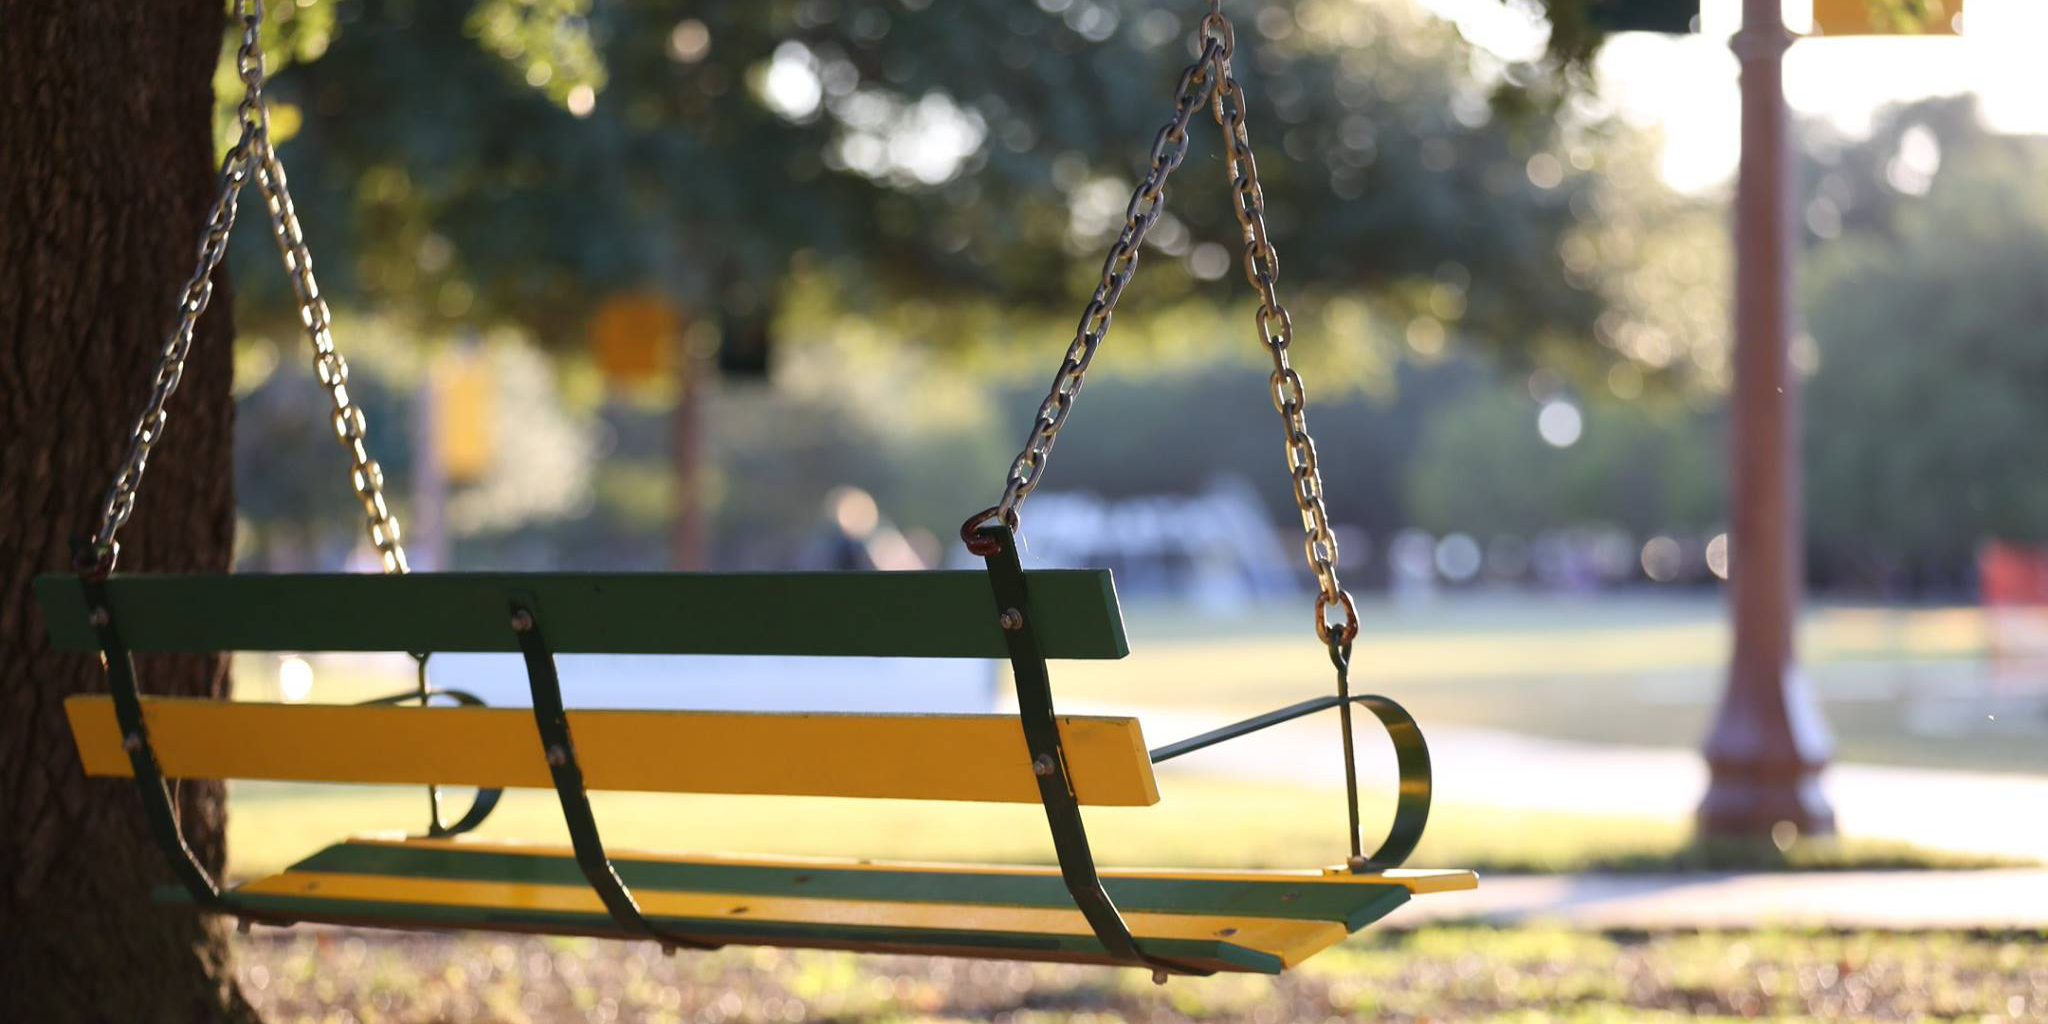 A Baylor swing on campus